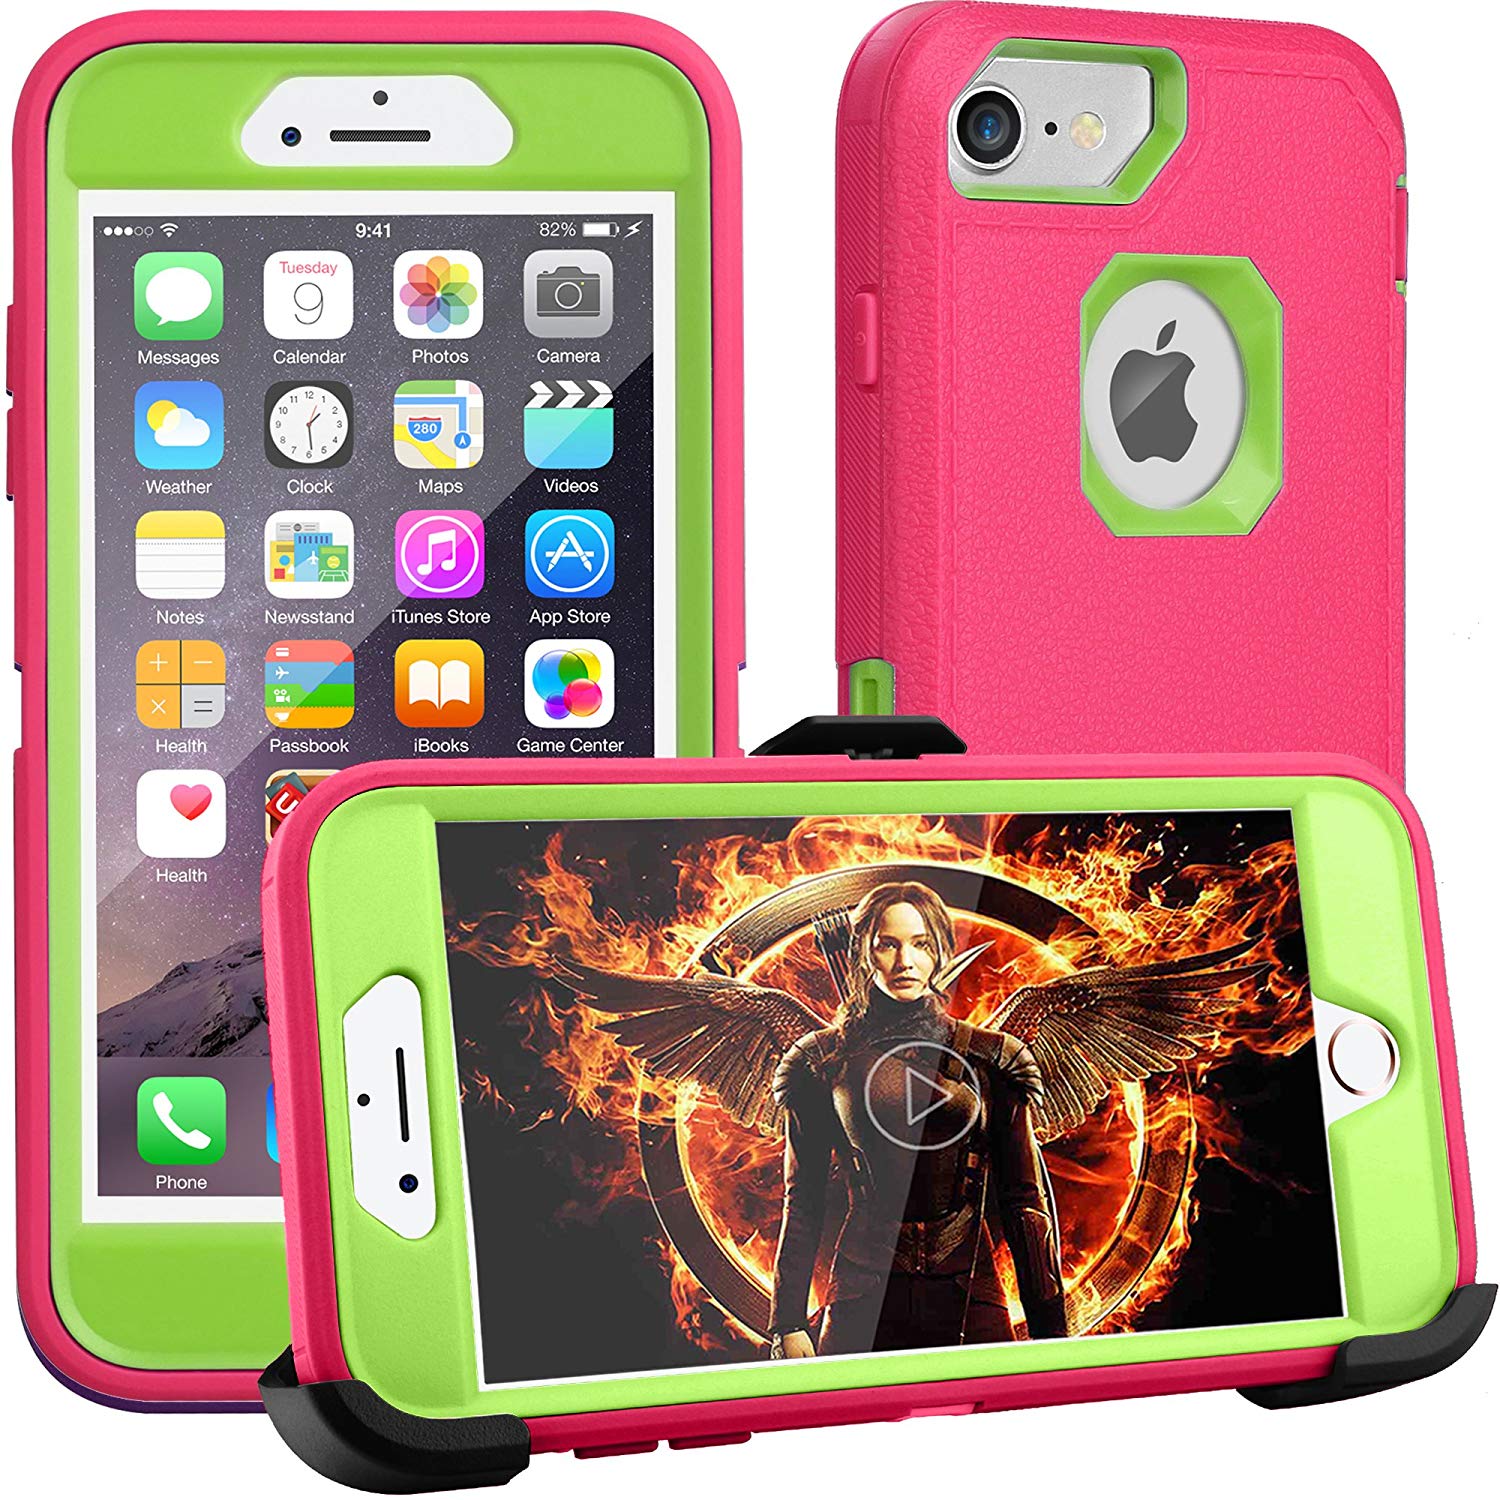 iPhone 8 case,iPhone 7 Case, iPhone 6s Case, FOGEEK [Dust-Proof] Belt-Clip Heavy Duty Kickstand Cover [Shockproof] Rugged Armor PC+TPU Shell for Apple iPhone 7 and iPhone 6/6s (Rose and Green) …